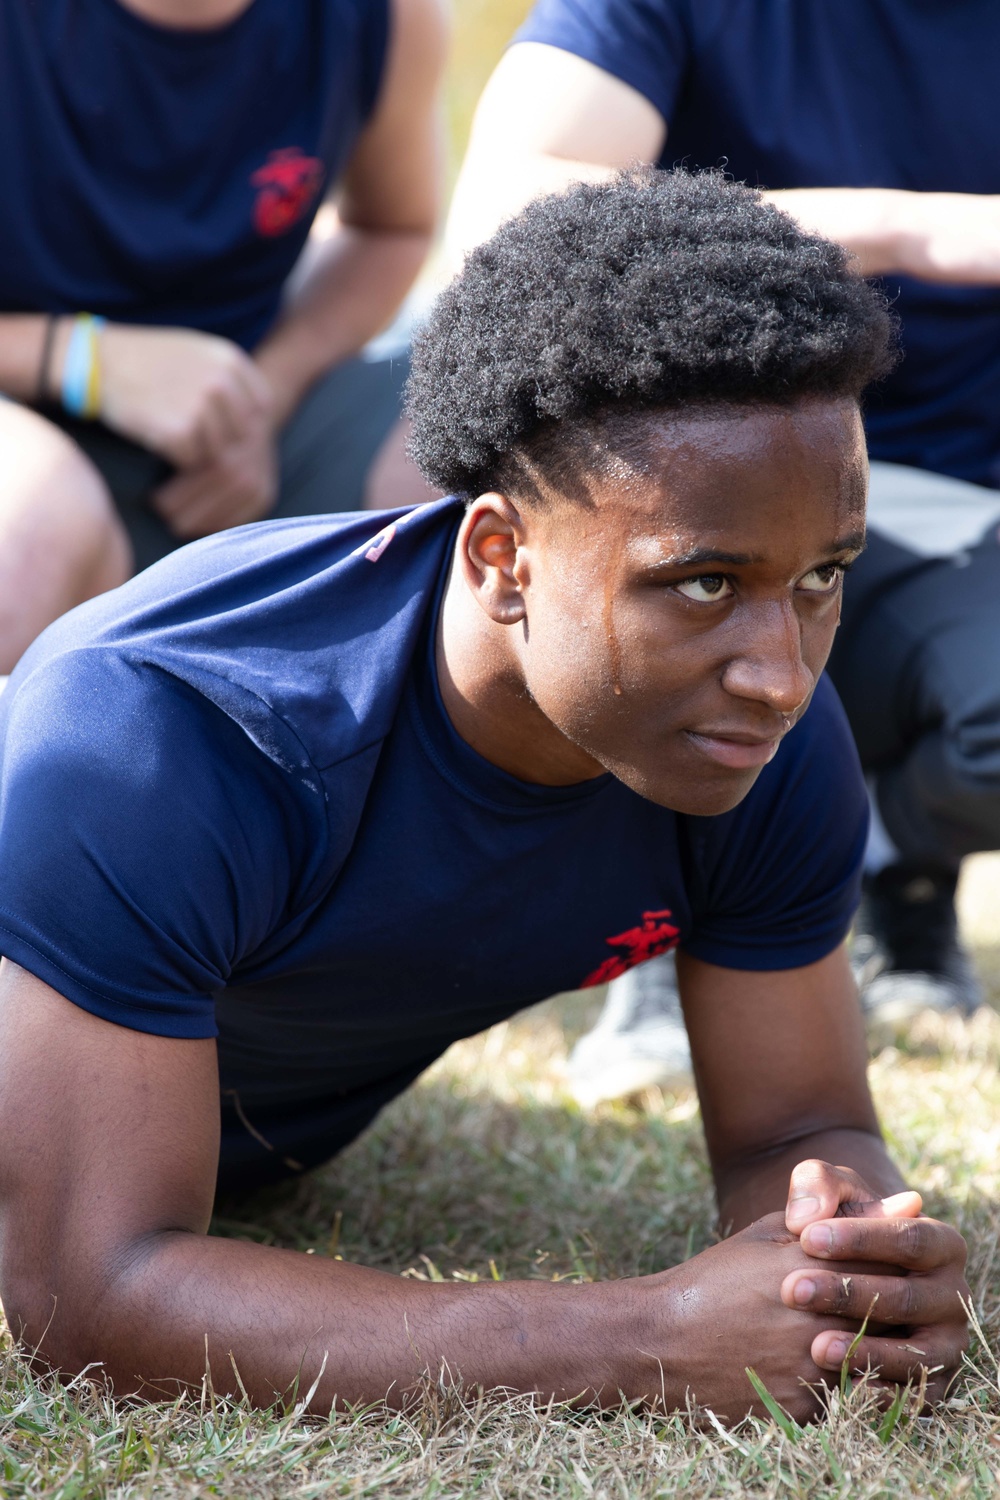 Effort in Gets Effort Out | Marine Corps Recruiting Station Montgomery Birmingham, Alabama Pool Function